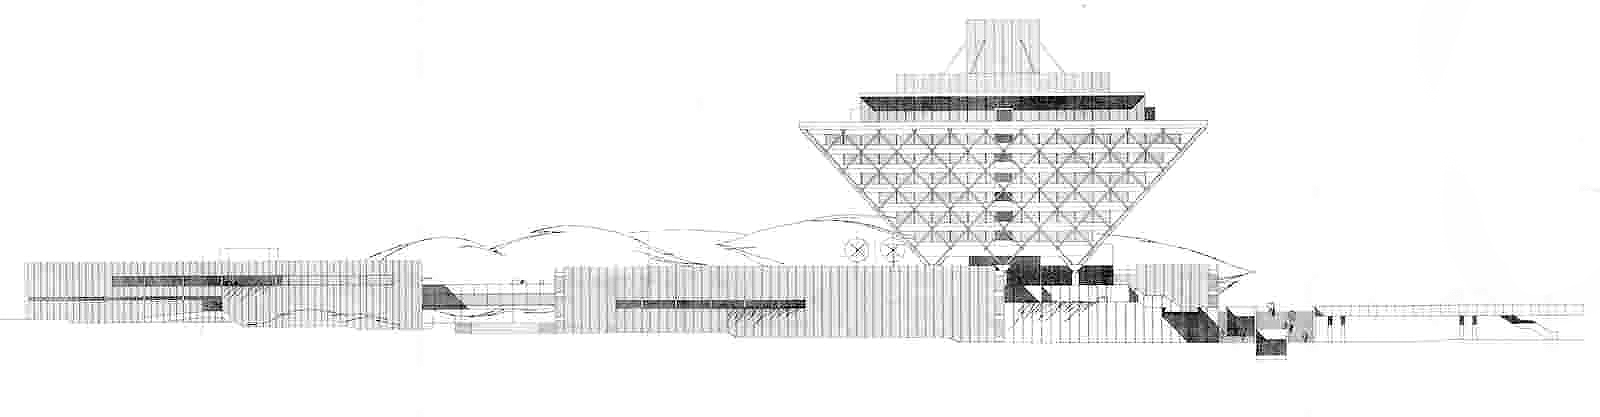 Elevation showing the walkways that connect out into the city by architects &Scaron;tefan Svetko, &Scaron;tefan ?urkovi? and Barnab&aacute;&scaron; Kissling.